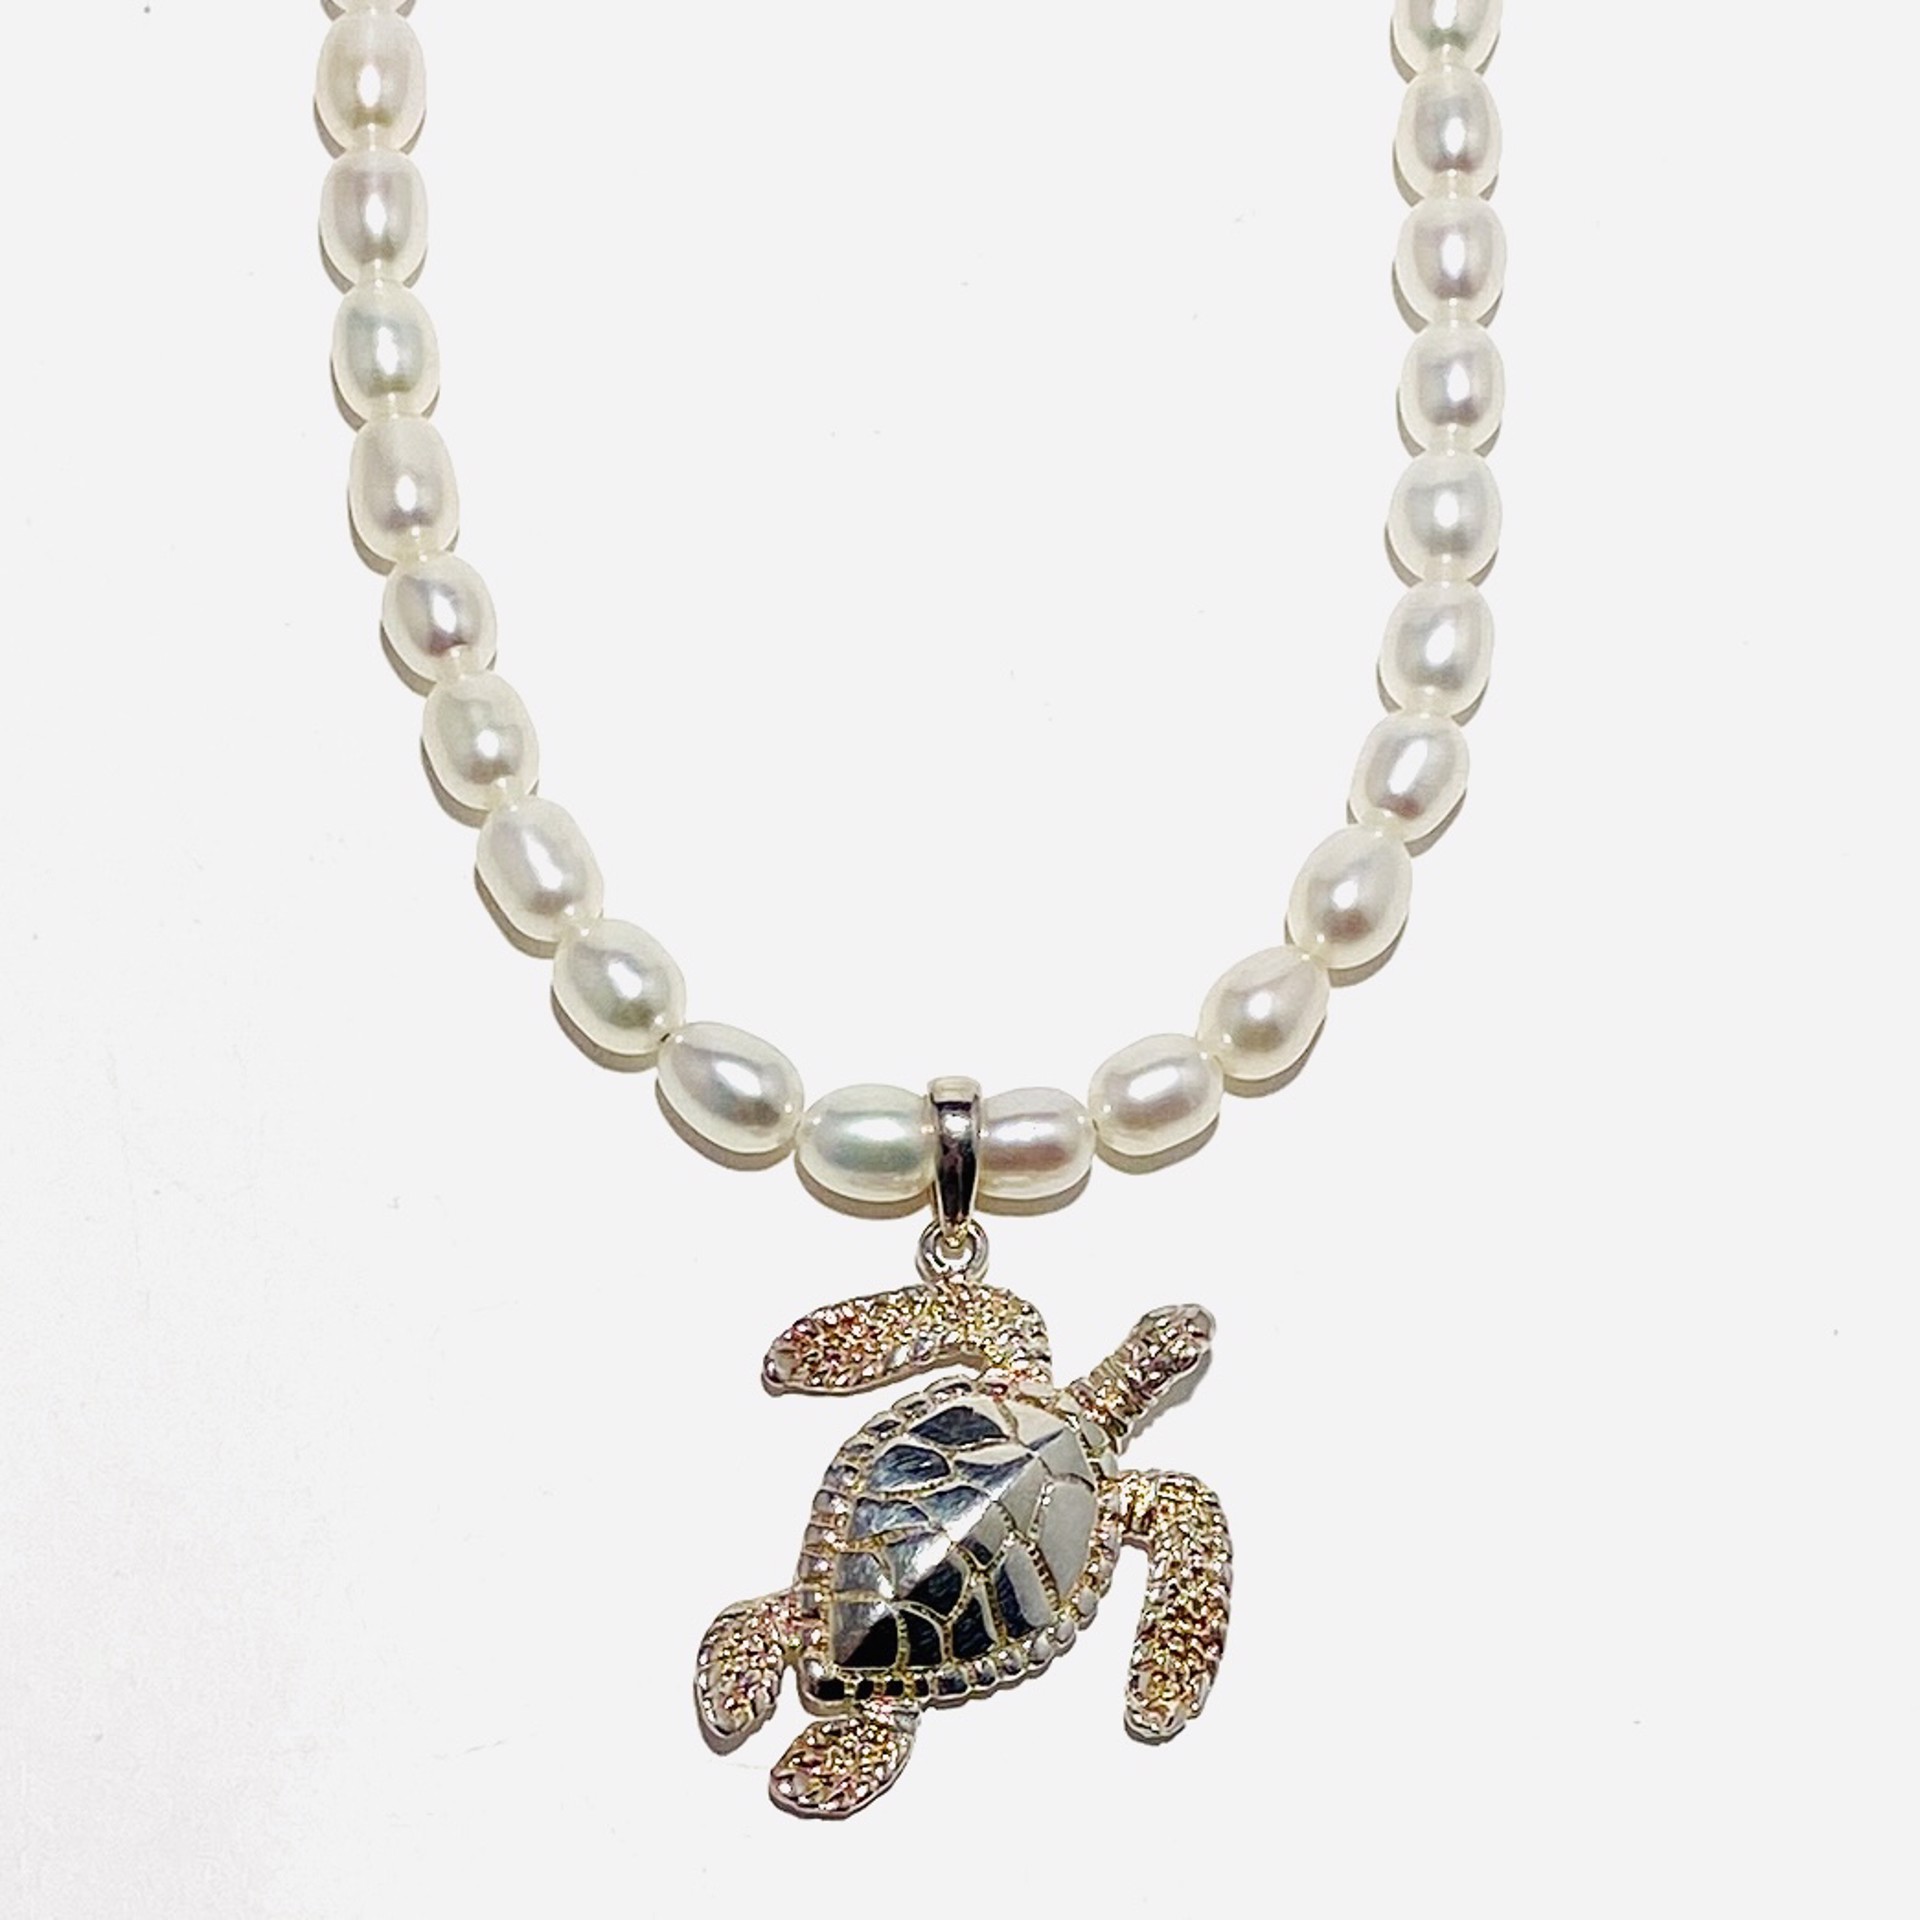 White Pearl Strand Sterling Turtle Pendant Necklace by Nance Trueworthy